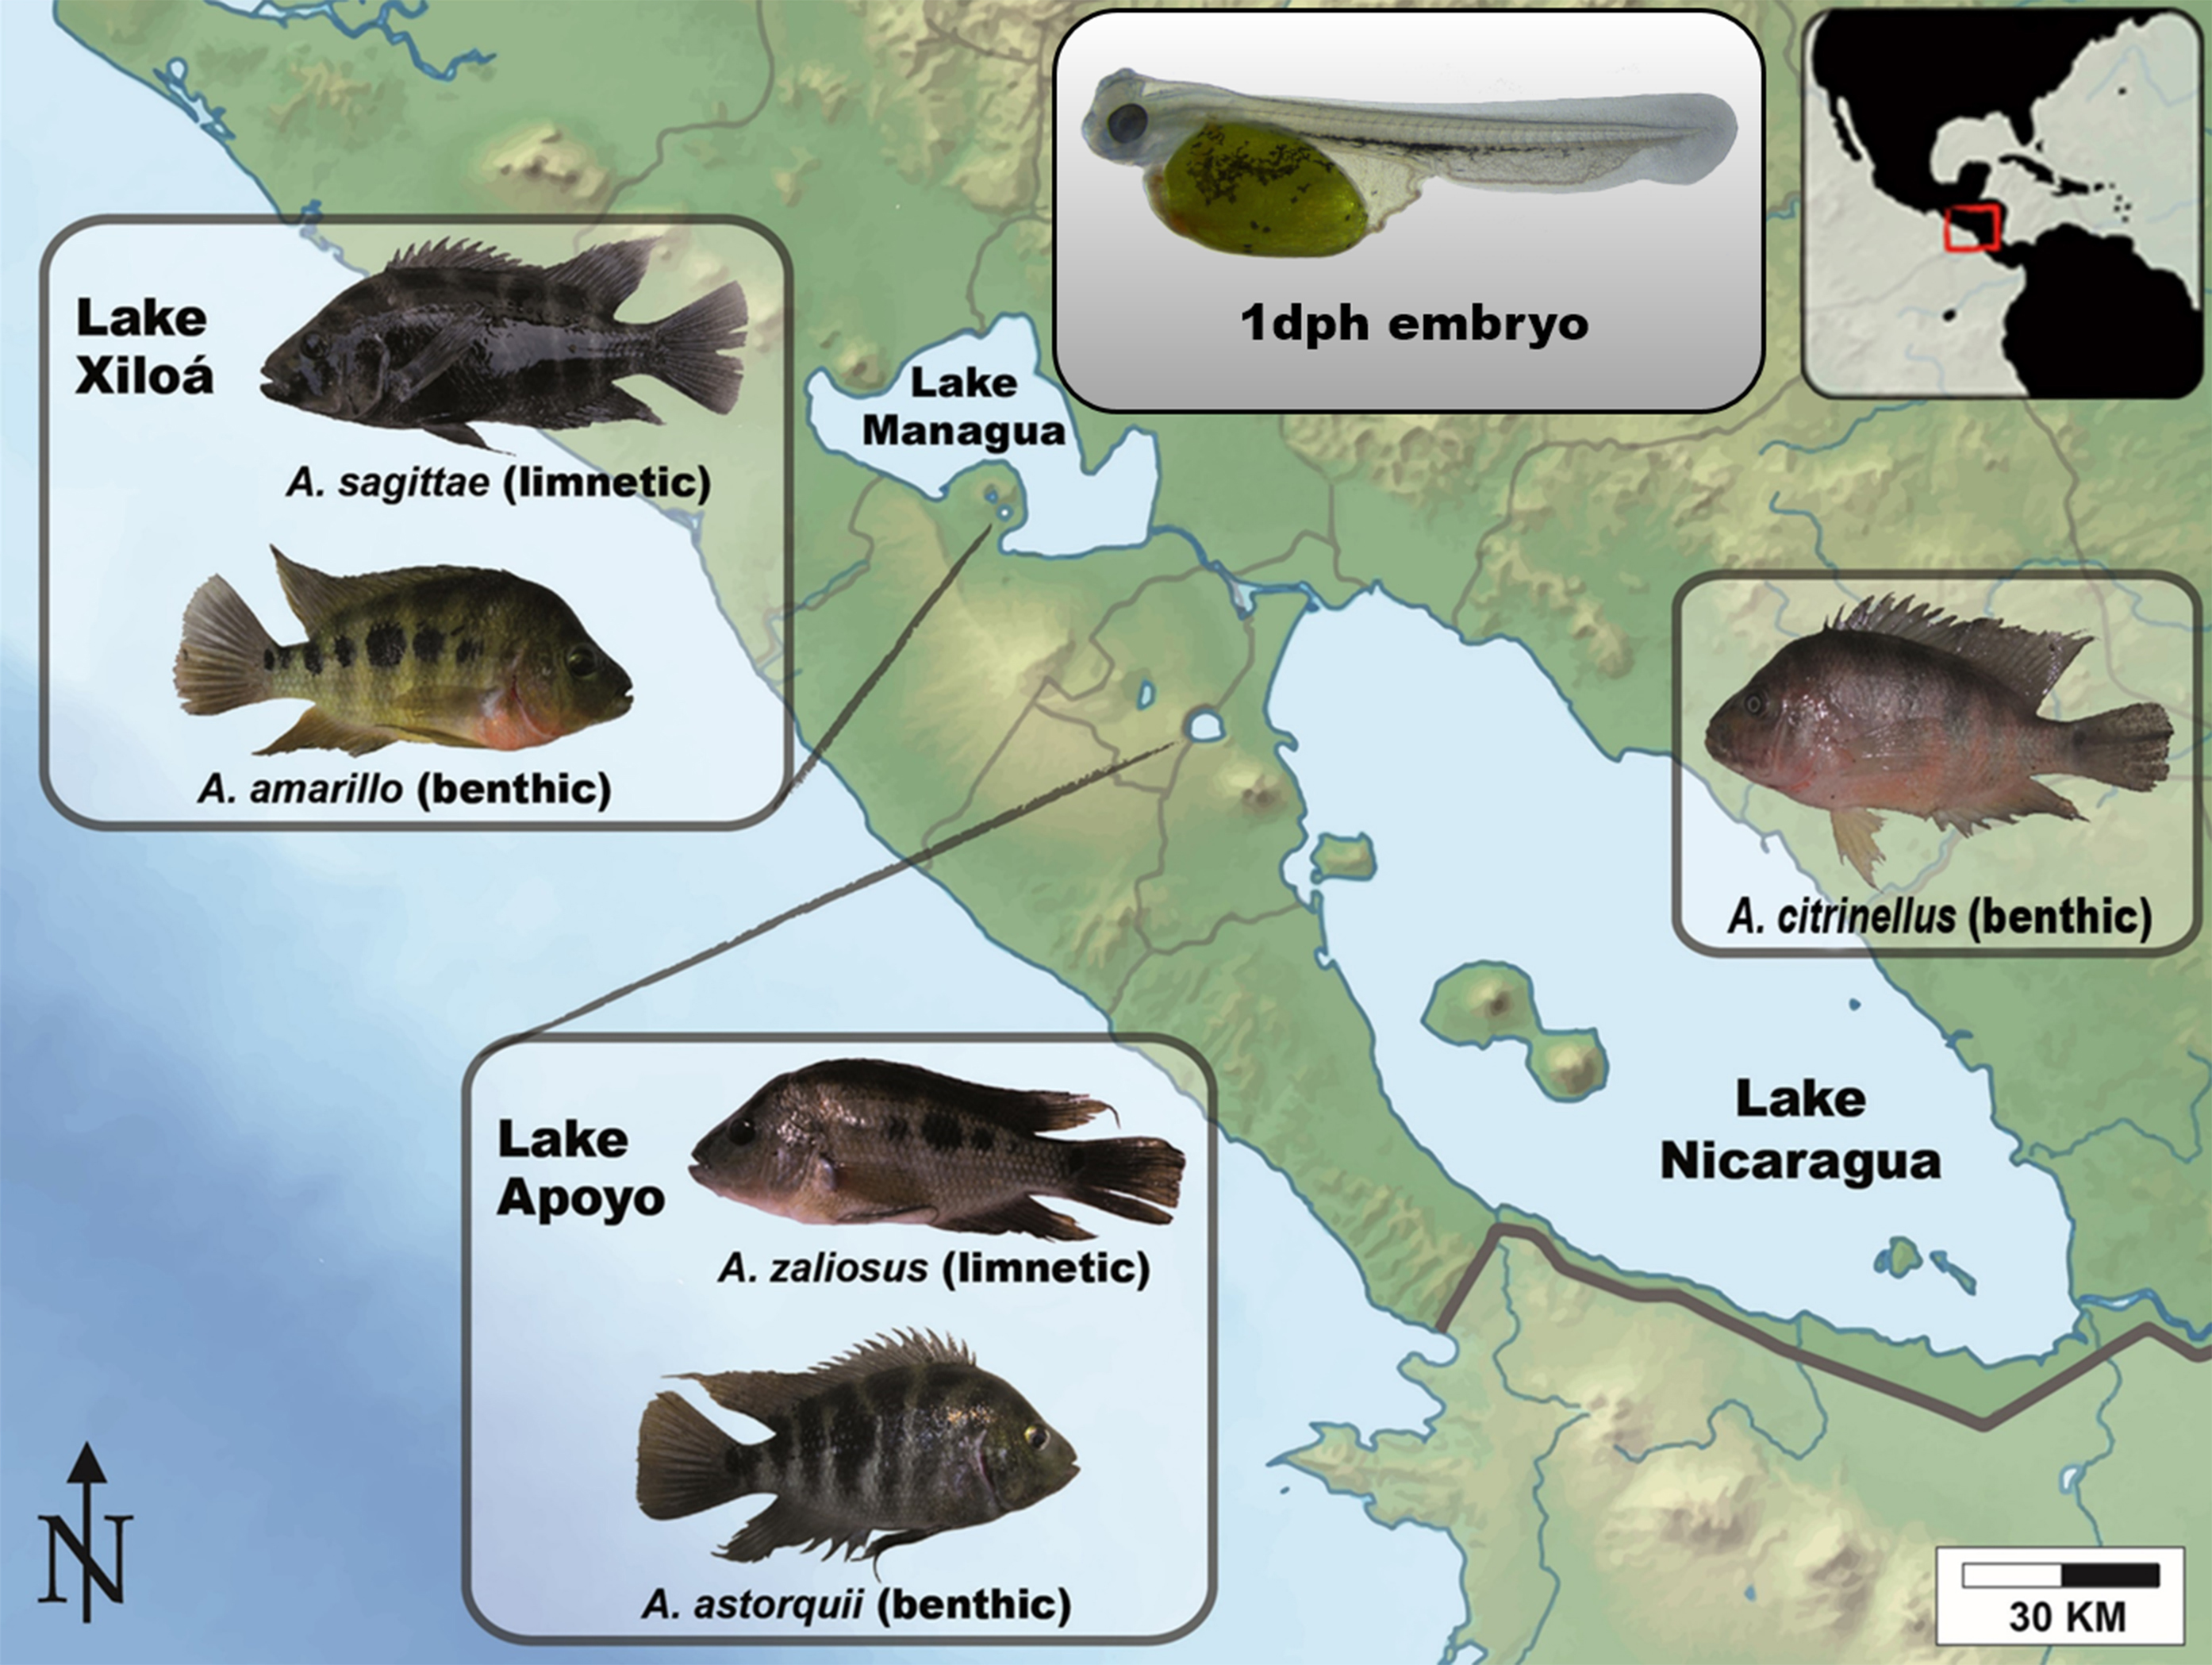 The Midas cichlid fish from the crater lakes of Nicaragua are one of the the best known examples for sympatric speciation. They evolved from a source population into a variety of independent species in less than 22,000 years.